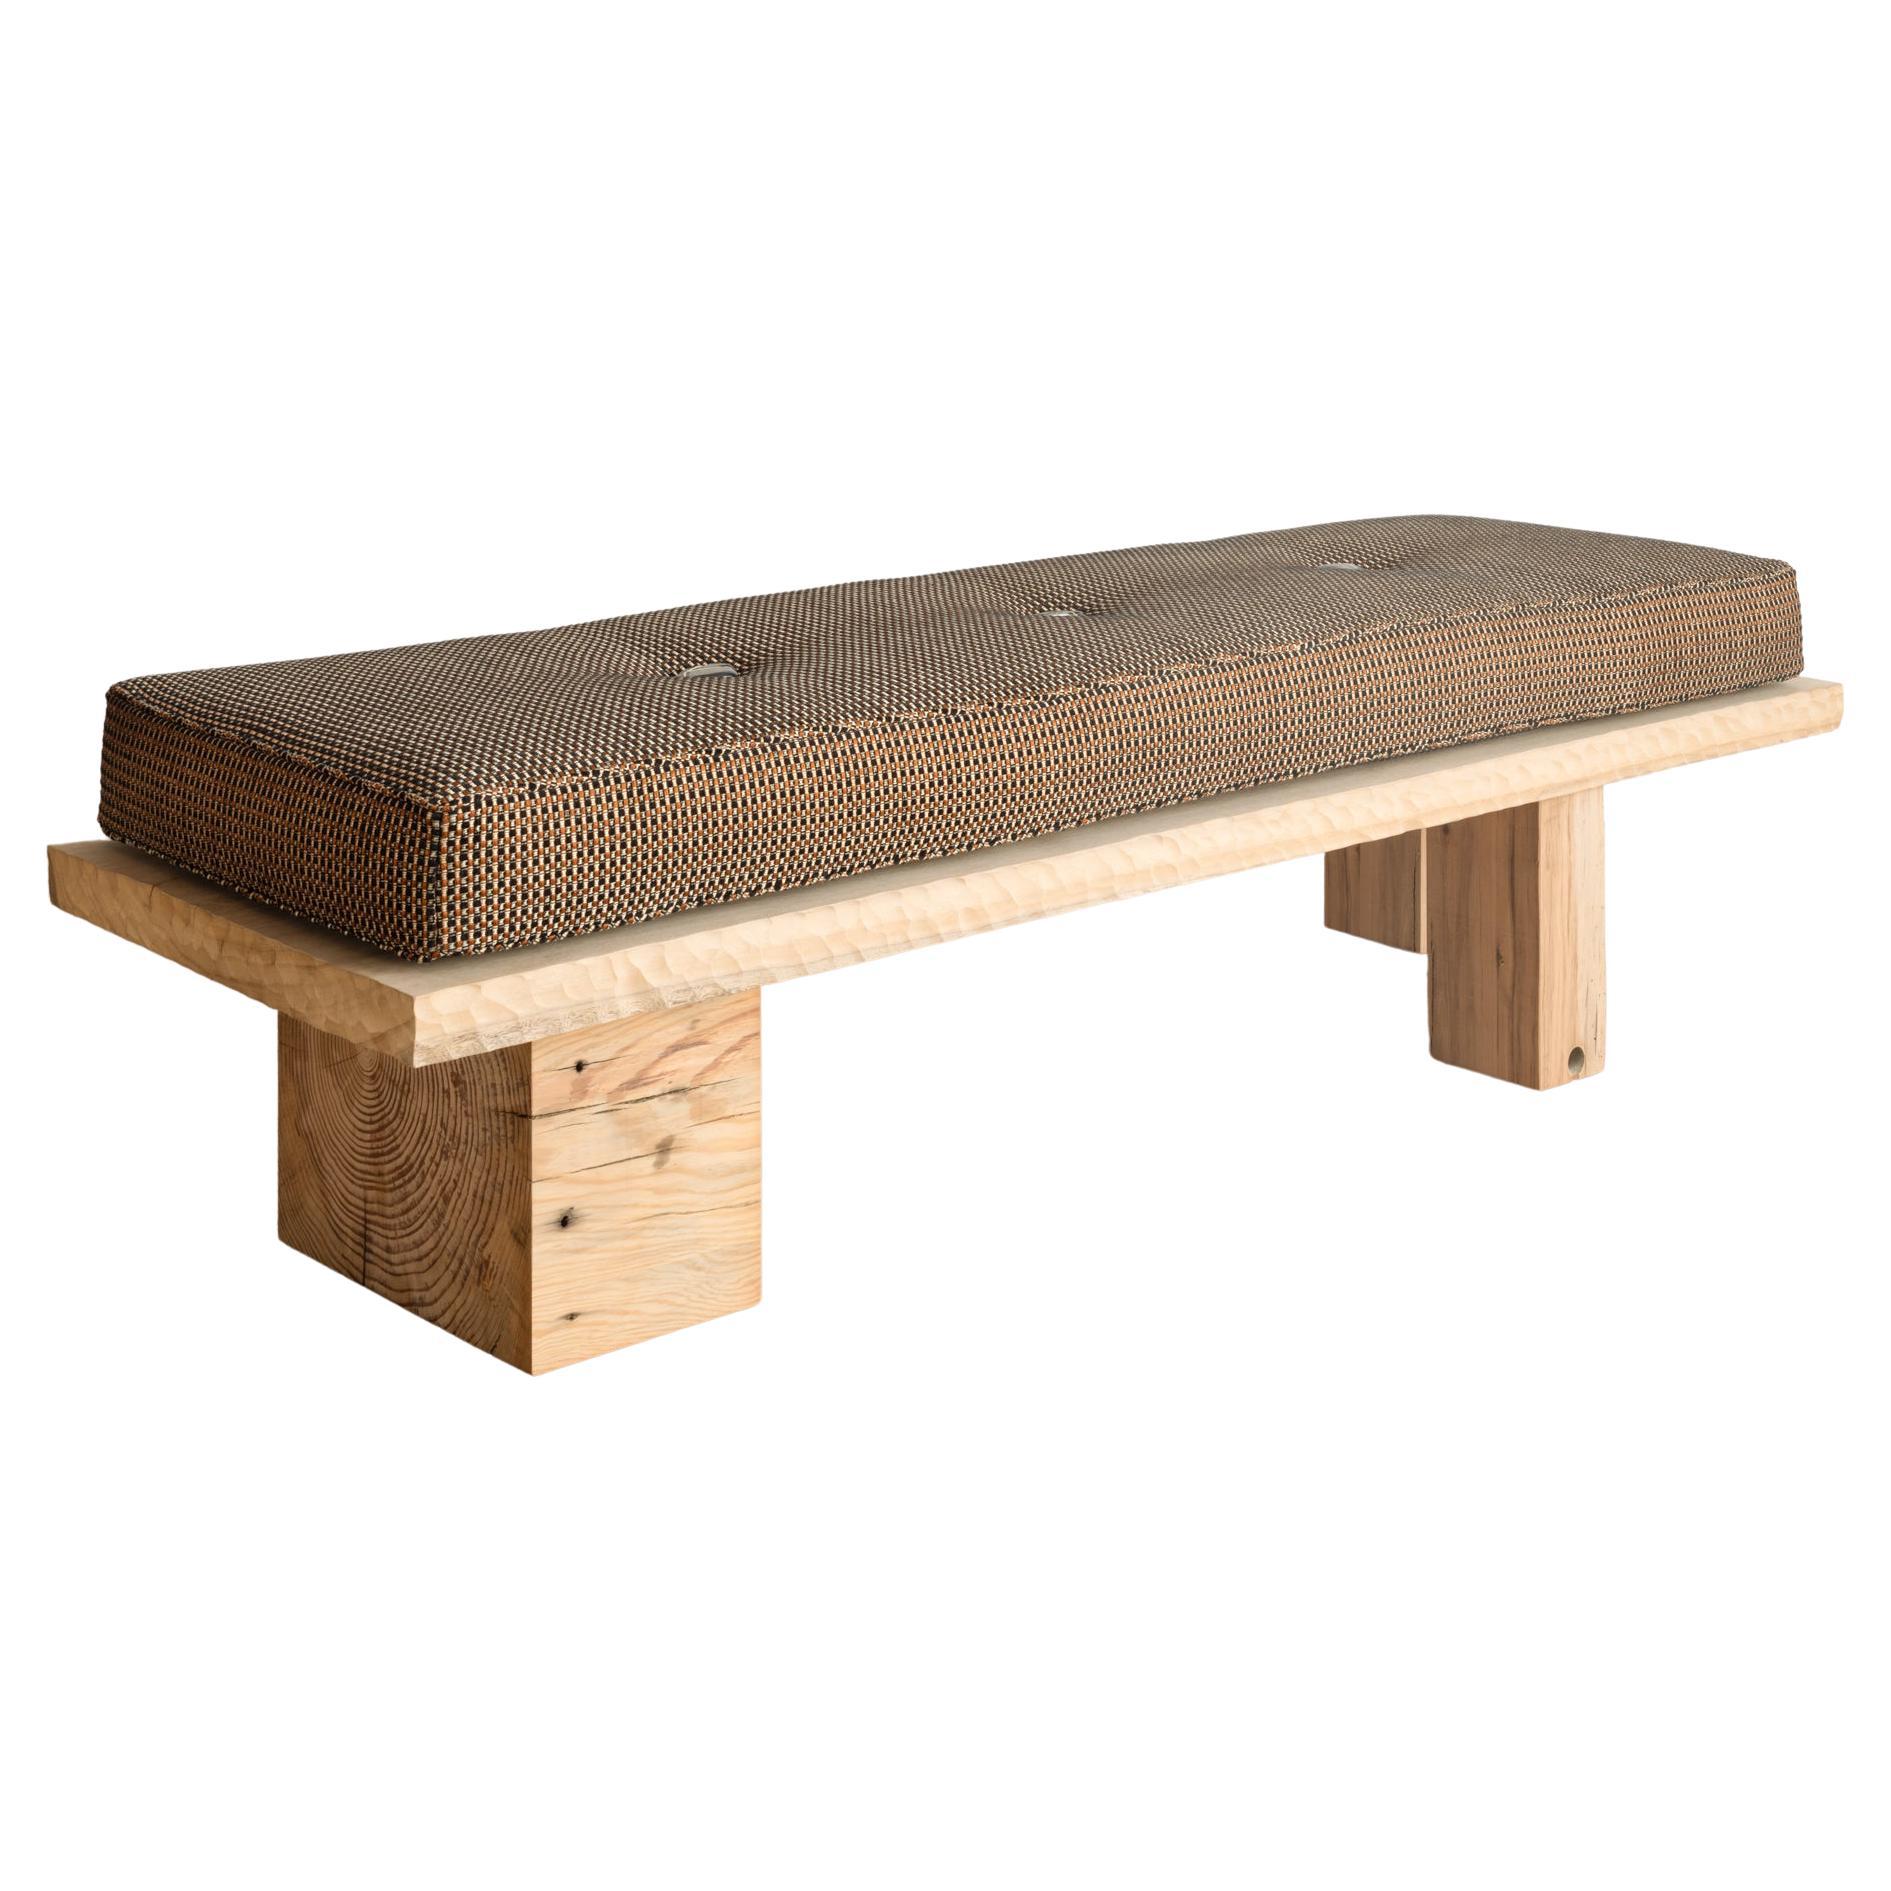 Hand-carved Wooden Bench with Upholstered Seat Cushion